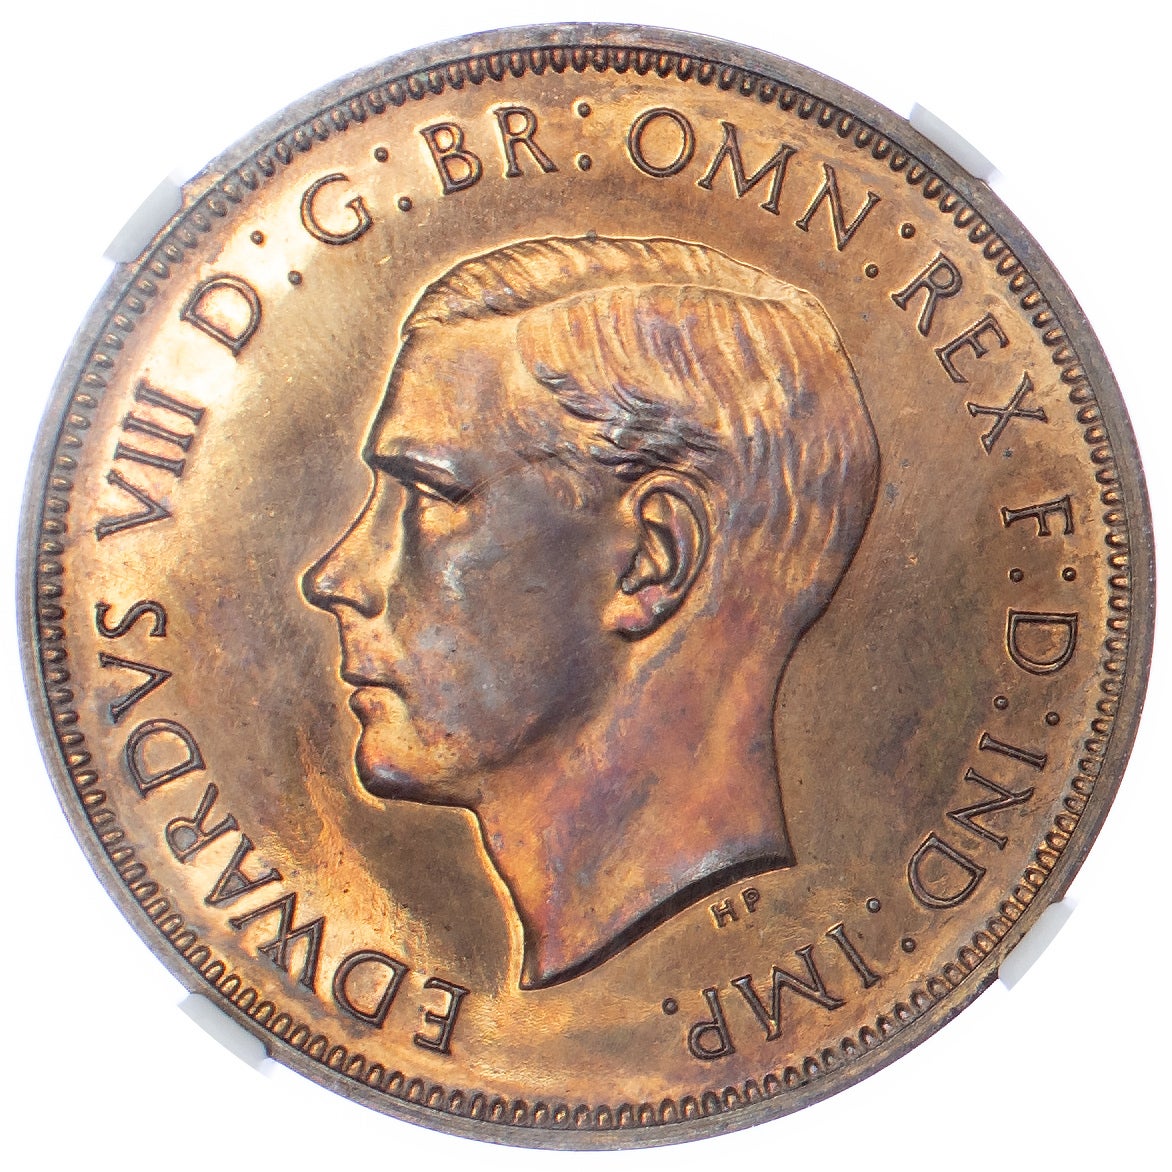 Shares in a rare coin marking King Edward VIII’s brief reign have been snapped up after it went into fractional ownership (Showpiece.com/PA)